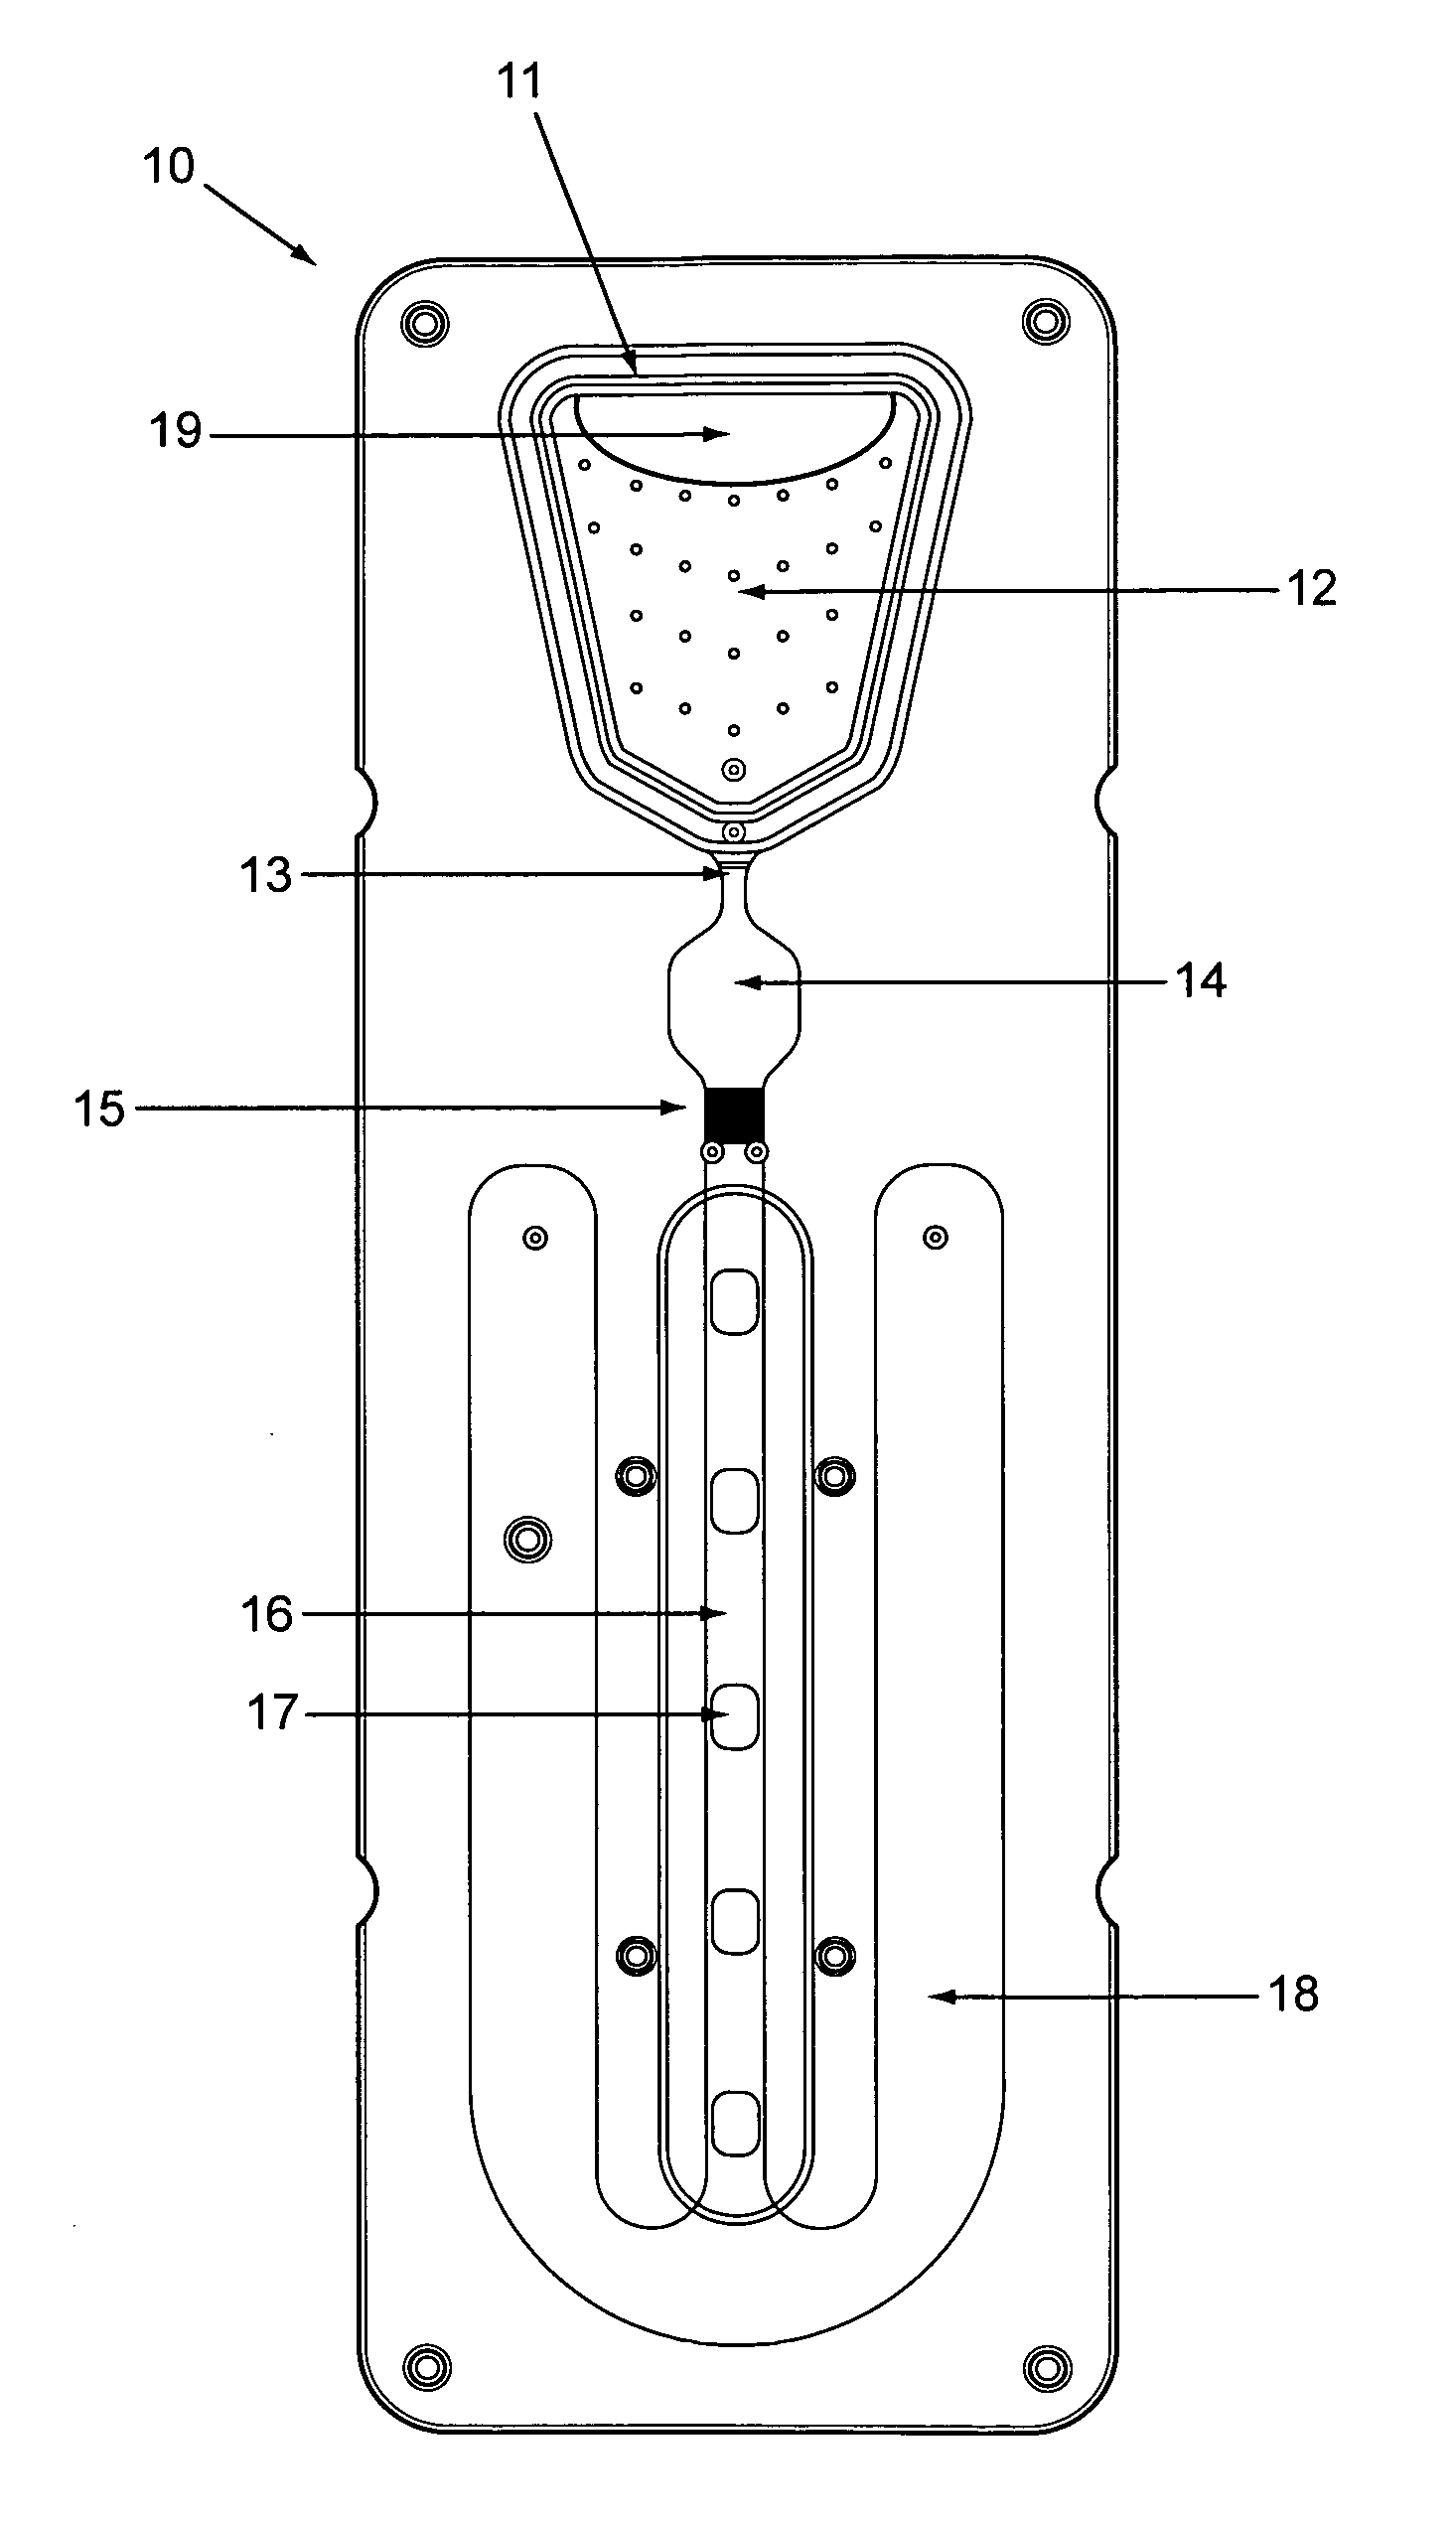 Analytical cartridge with fluid flow control